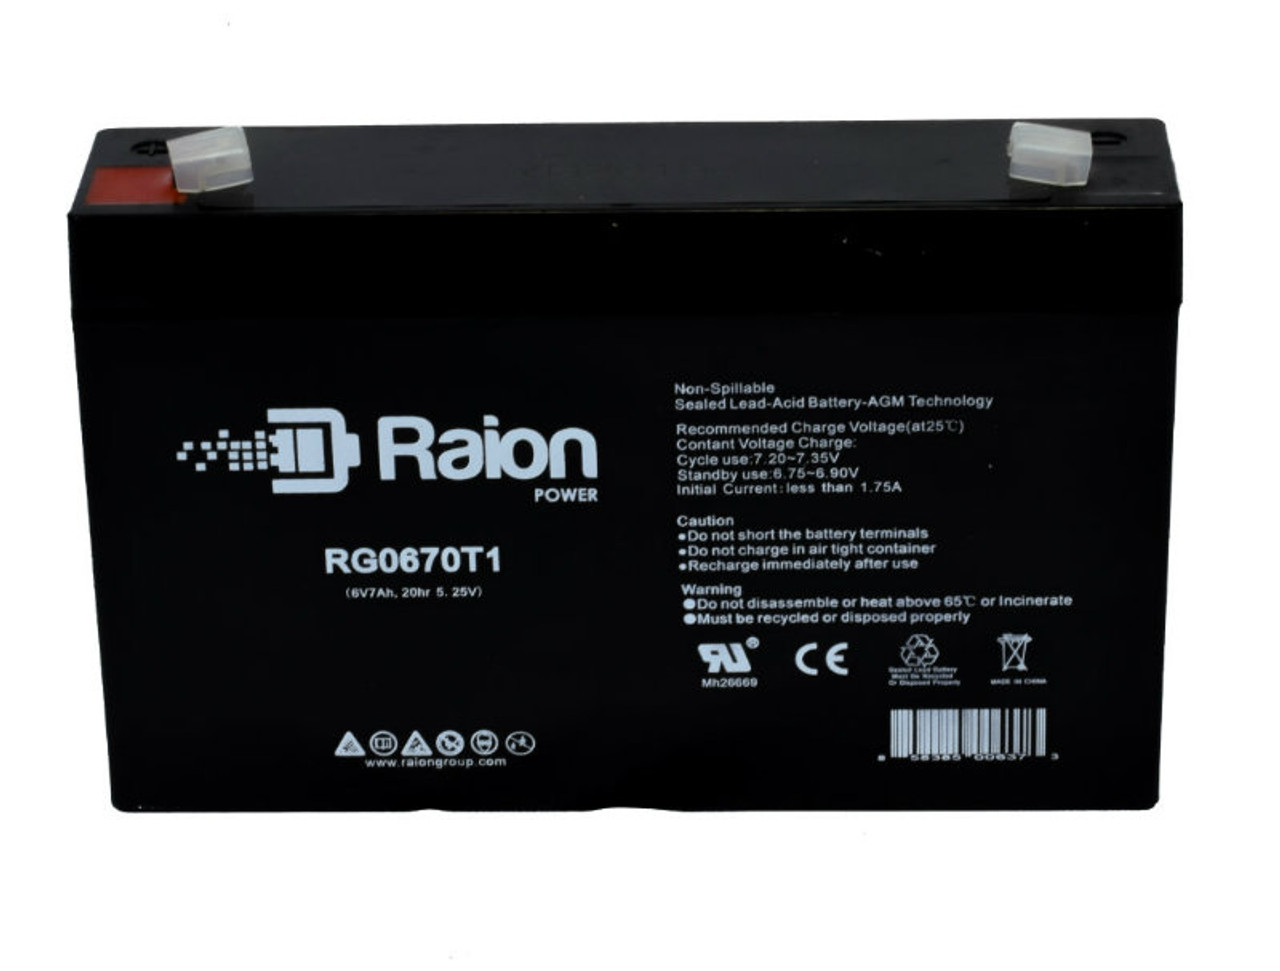 Raion Power RG0670T1 Replacement Battery Cartridge for Ivy Biomedical System 702